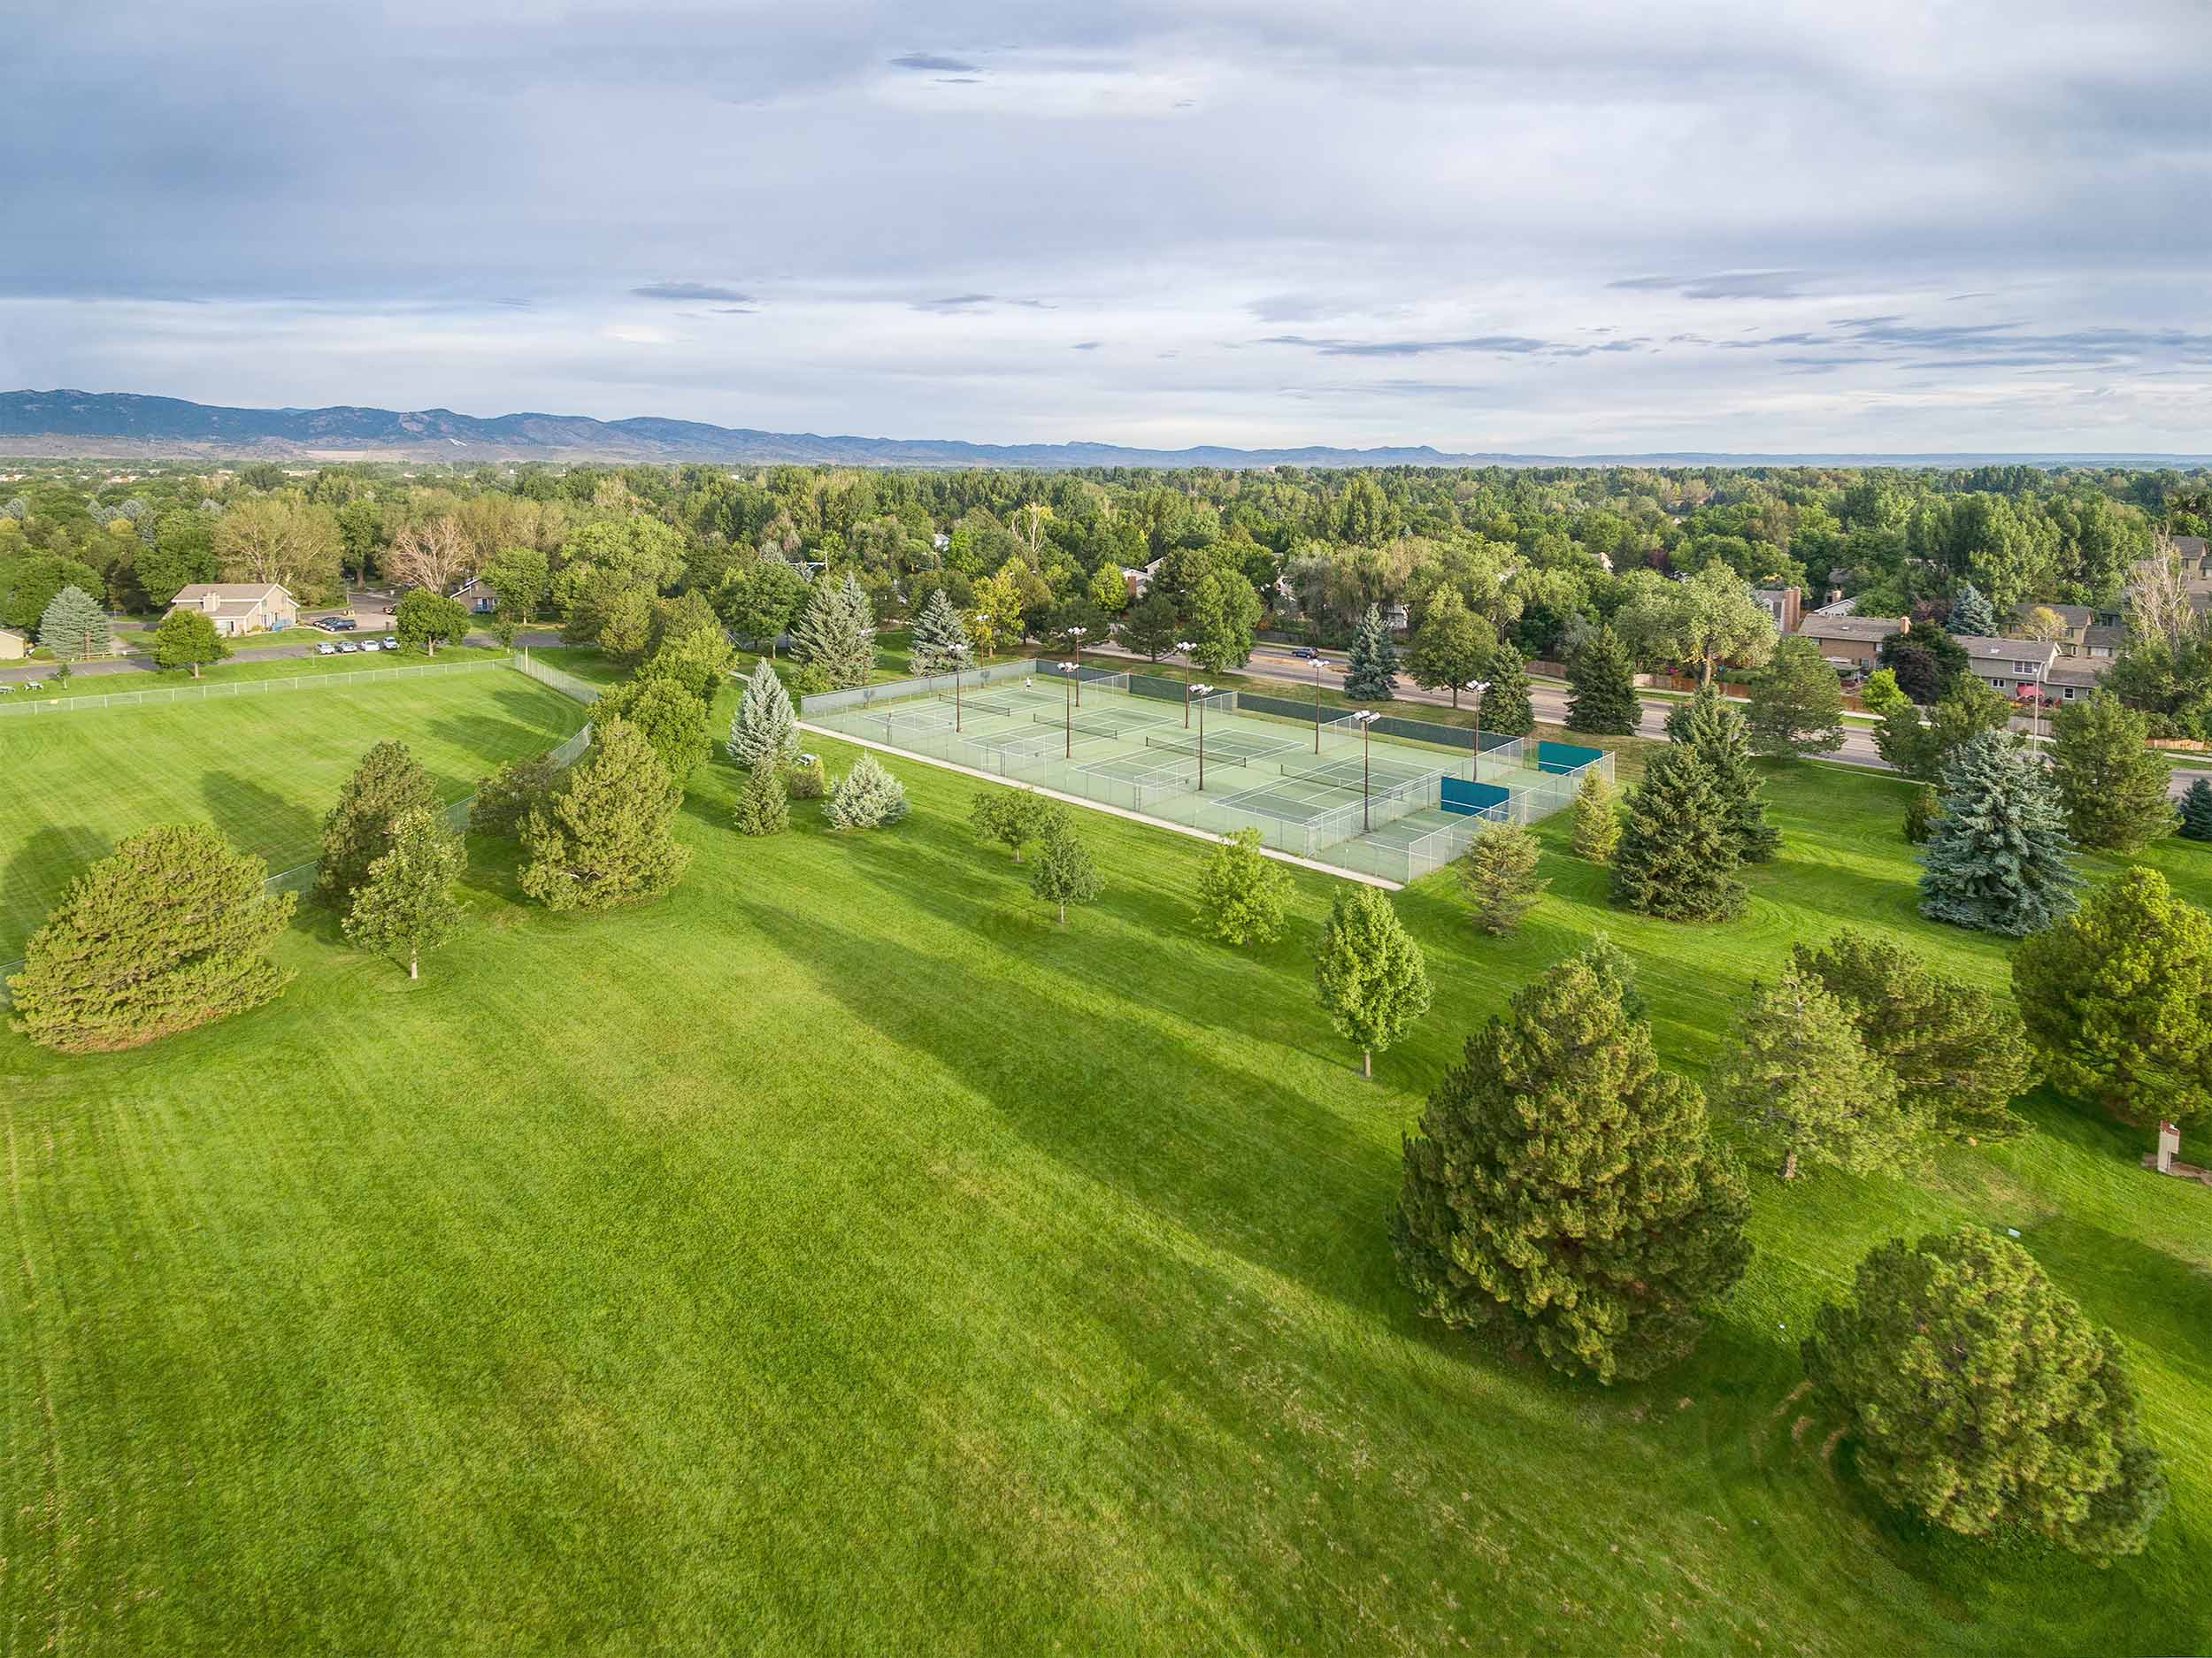 Aerial view of Fort Collins park and tennis court